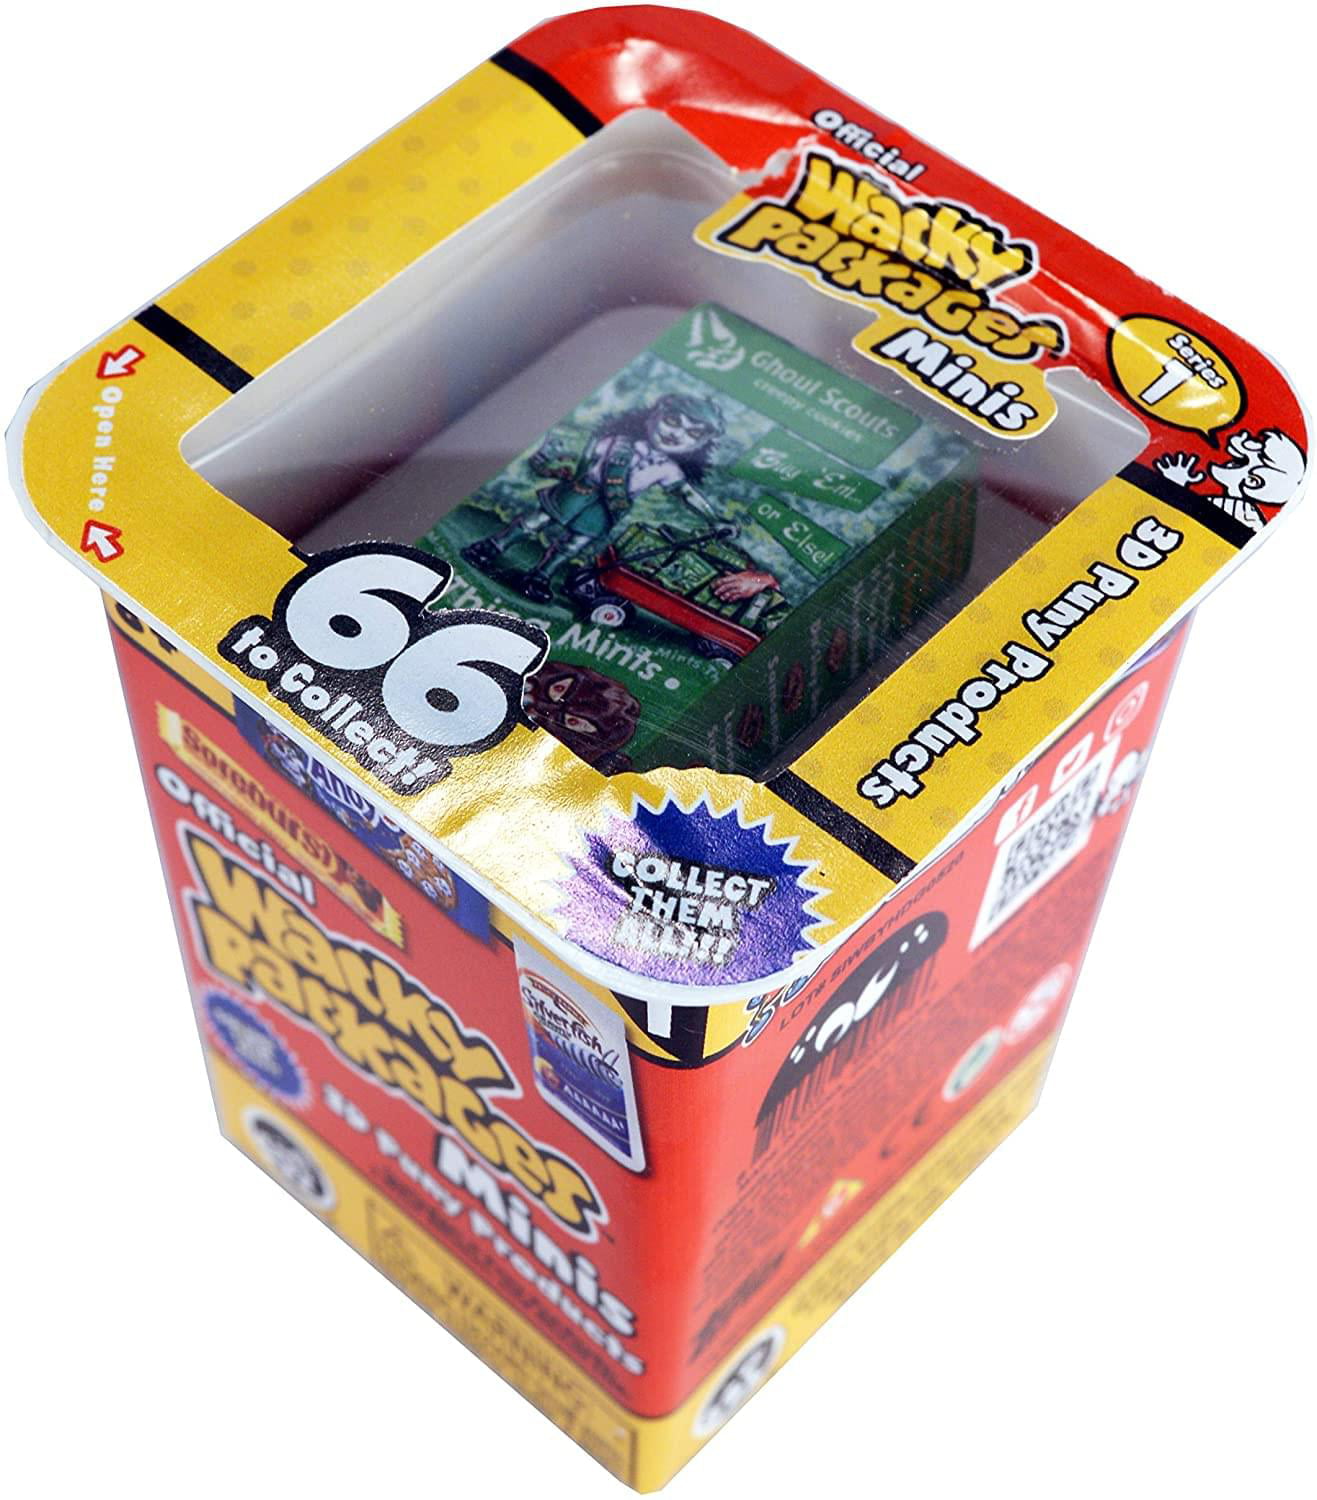 Details about   TOPPS OFFICIAL WACKY PACKAGES MINI SERIES 1 3D PUNY PRODUCTS YOU PICK $1.99 SHIP 